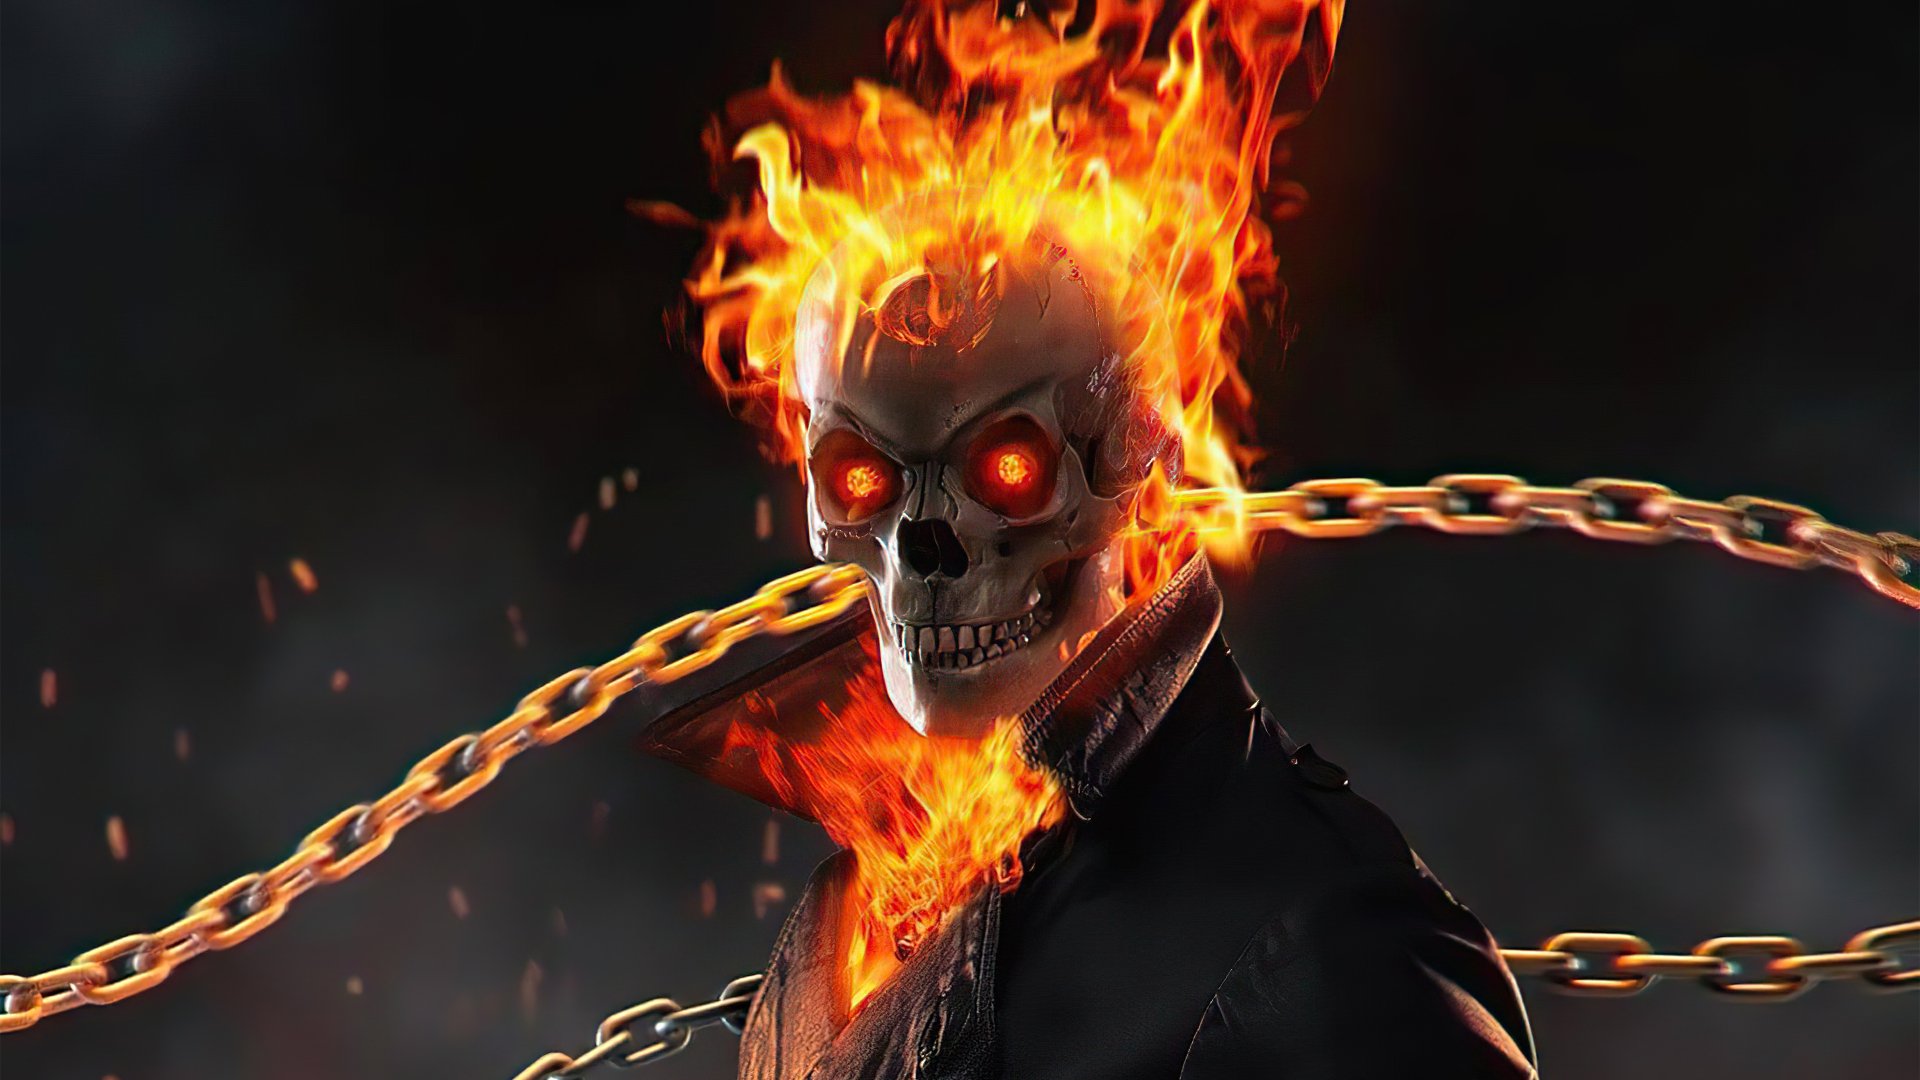 3840x2160 Ghost Rider Wallpaper Background Image. 